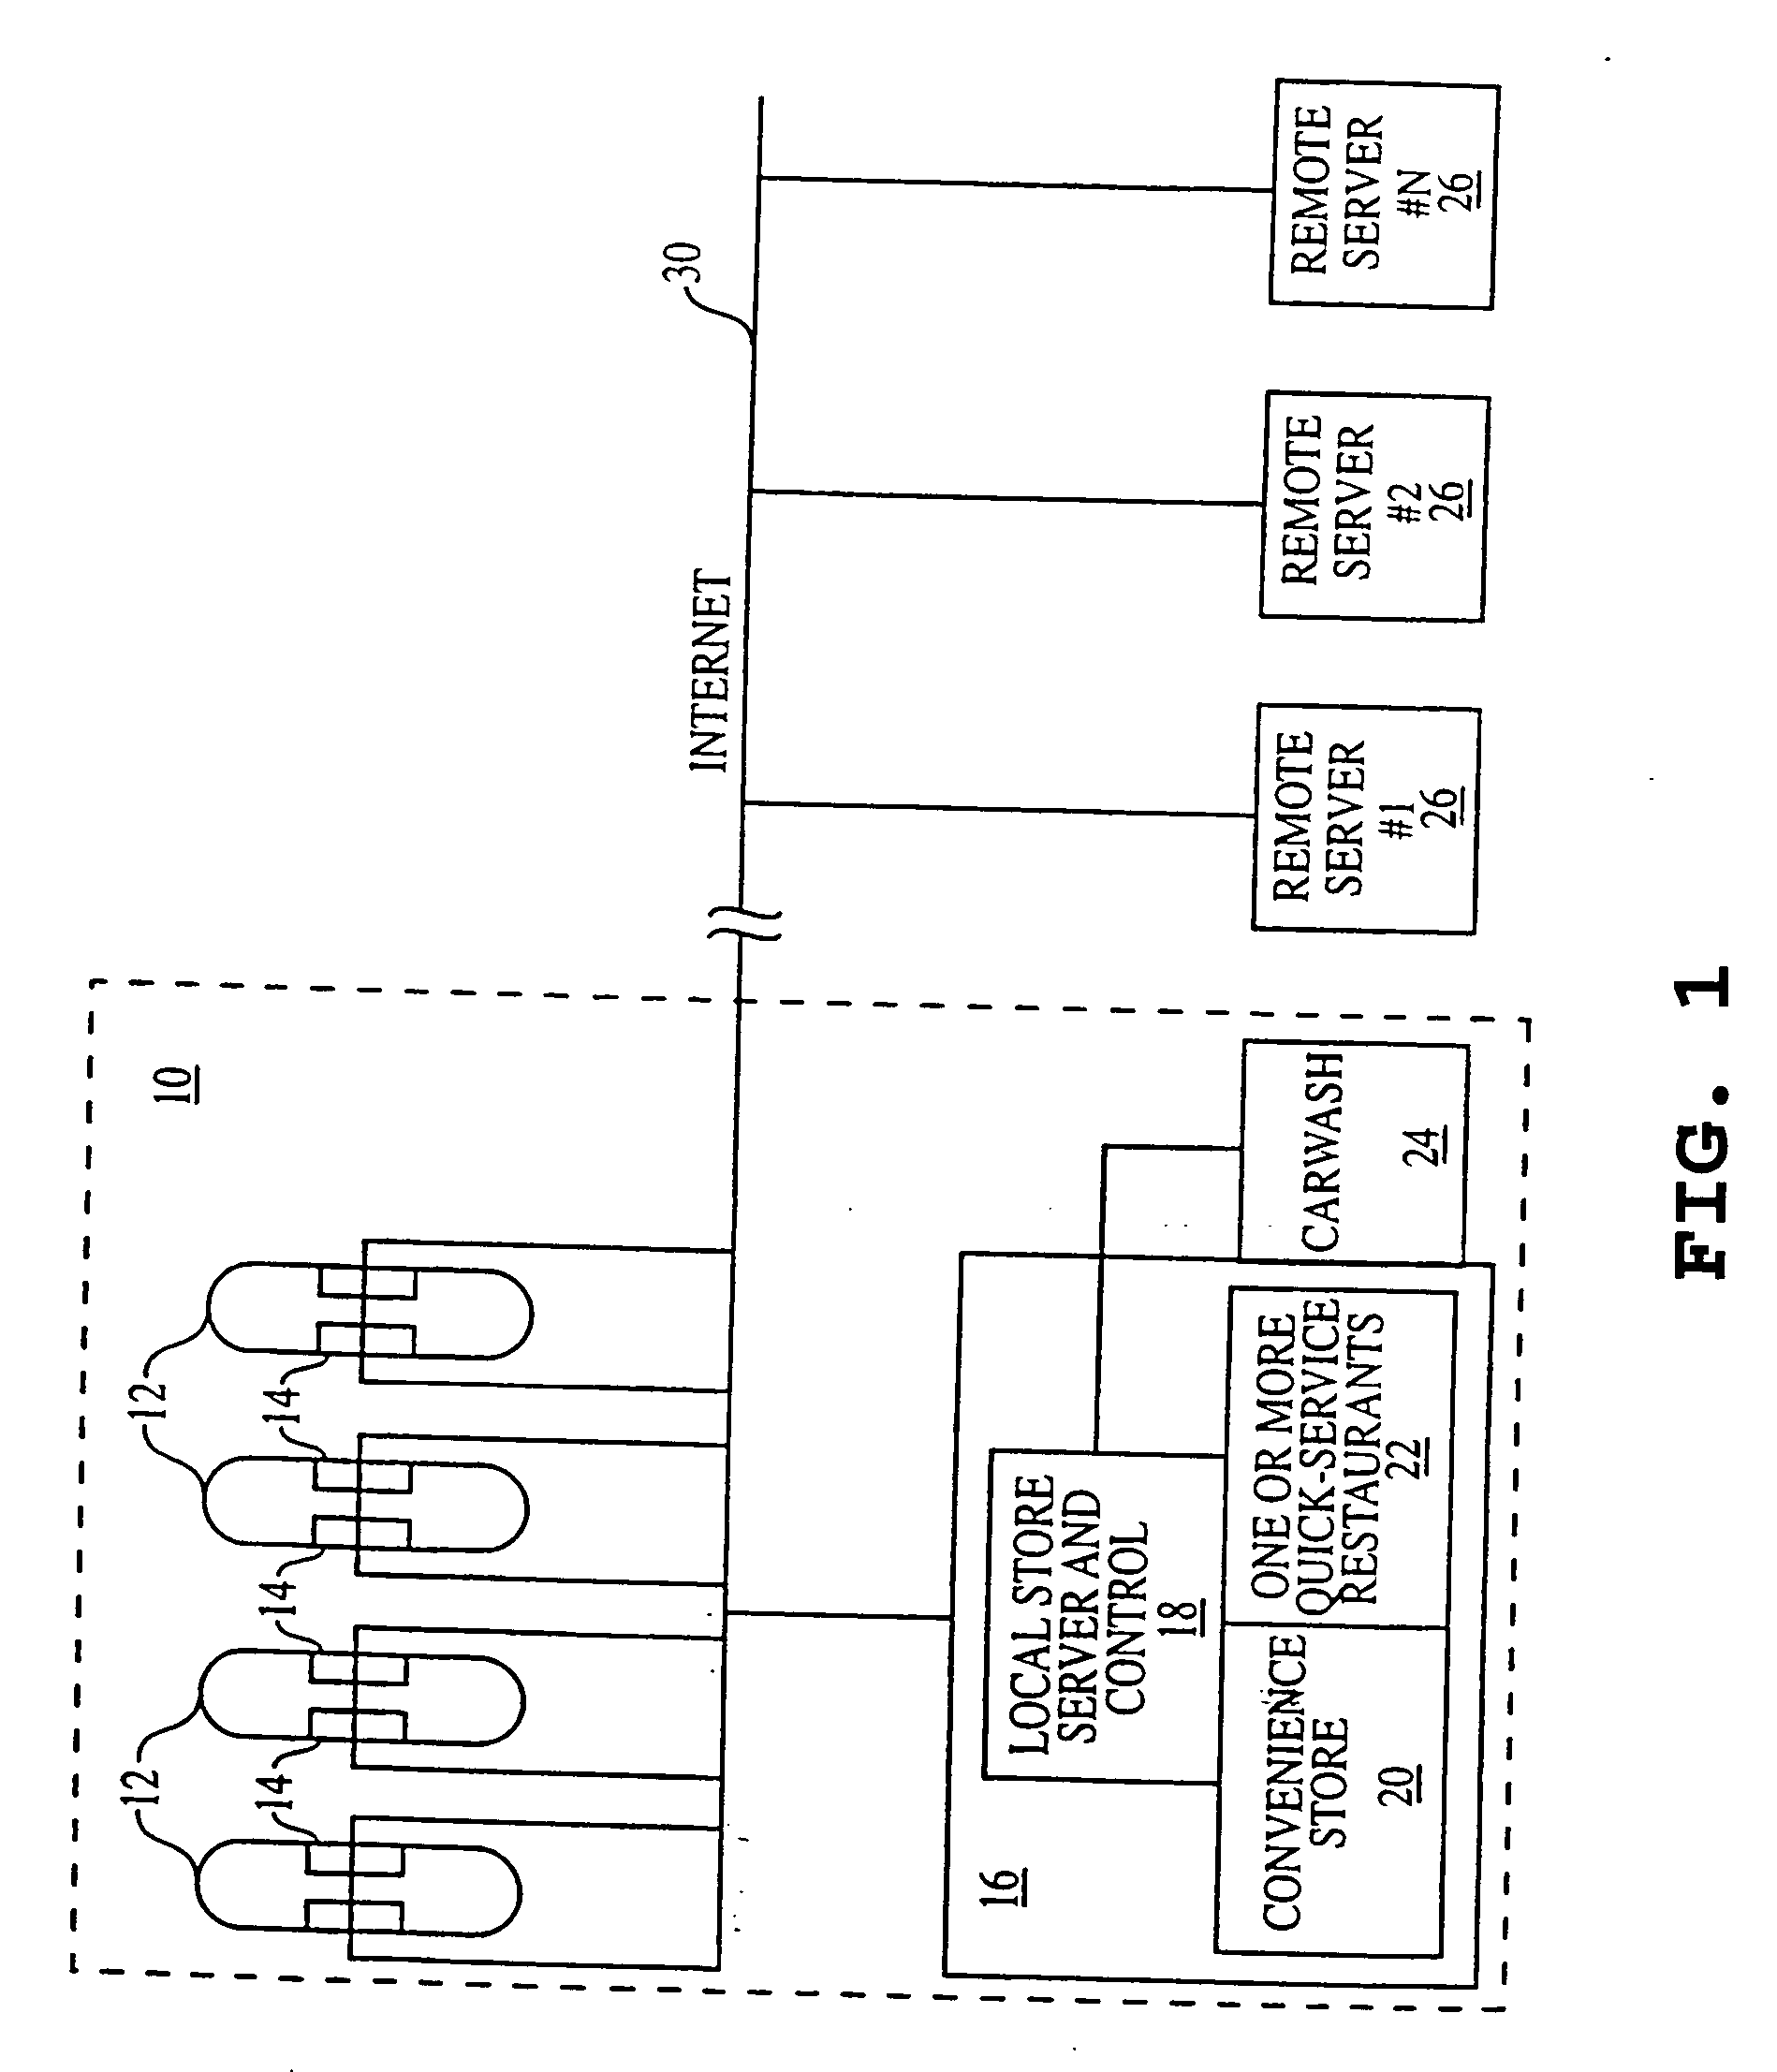 System and method for interactive messaging and/or allocating and/or upgrading and/or rewarding tickets, other event admittance means, goods and/or services